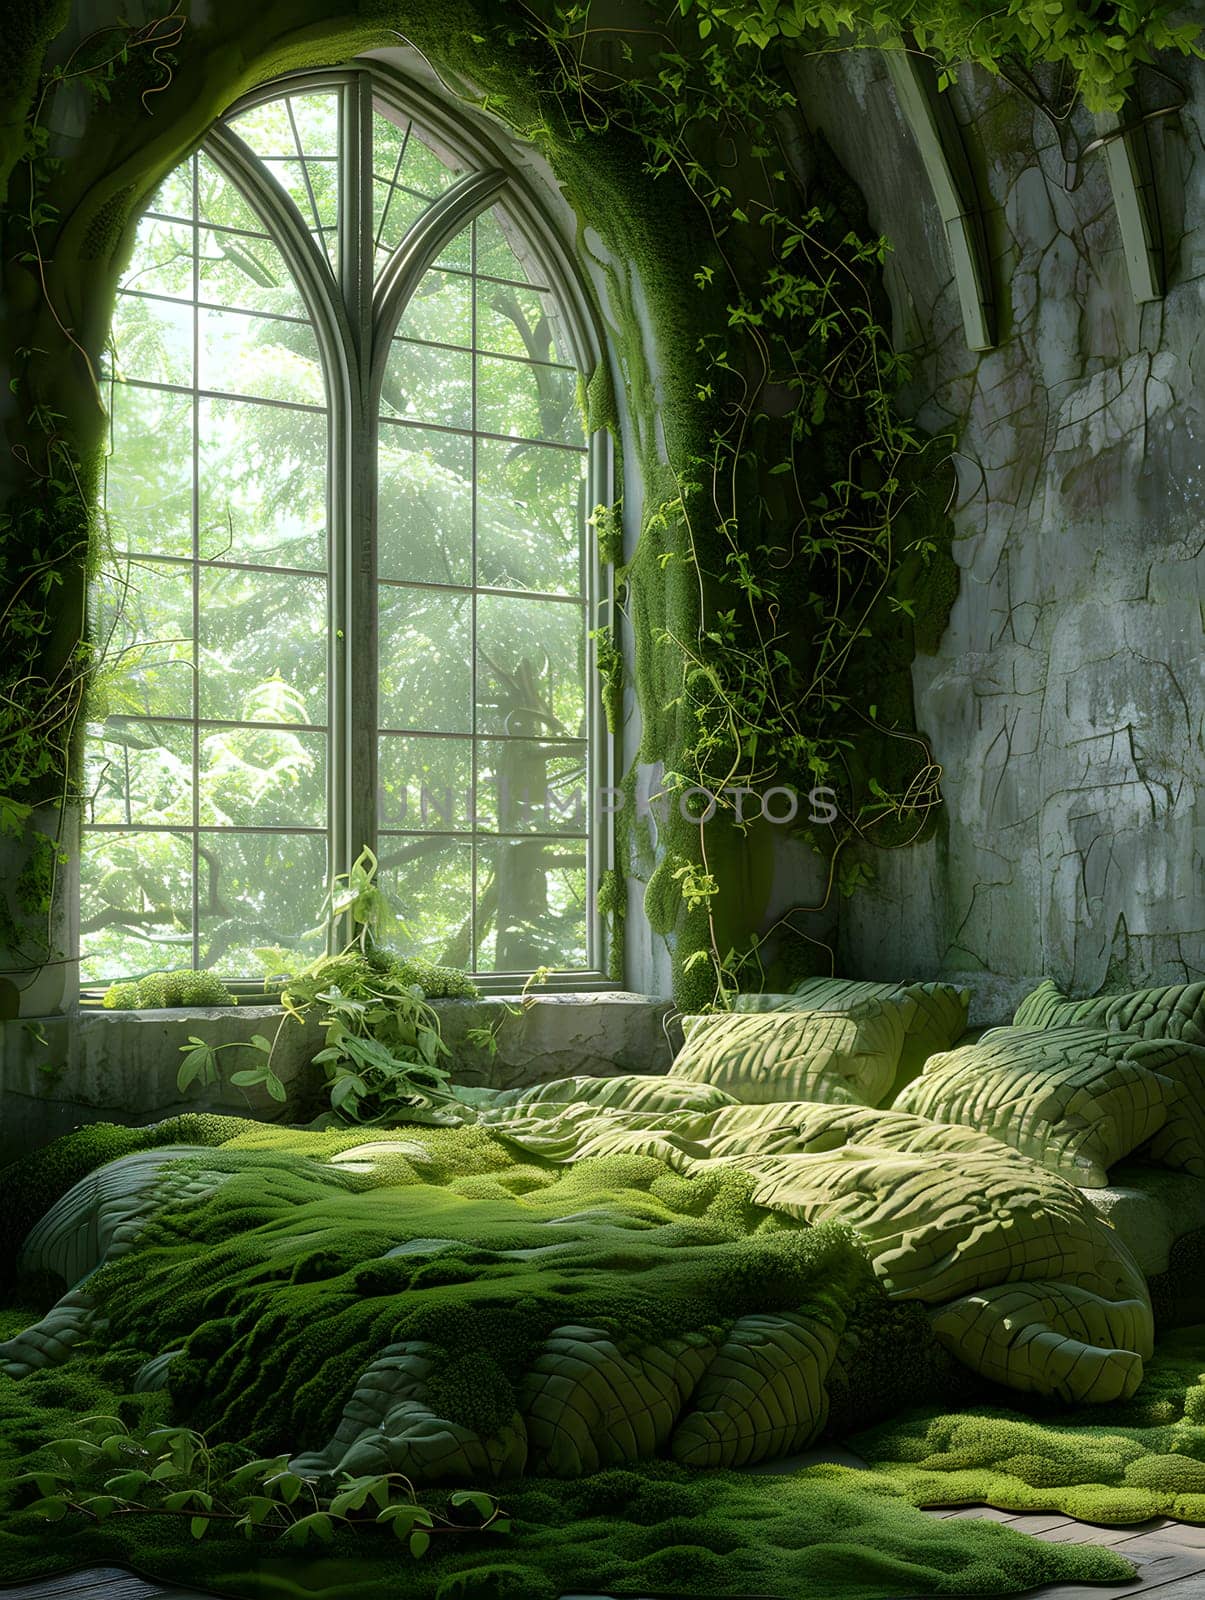 A room with a bed and a window, the natural environment filled with vegetation and sunlight, with moss covering the window, creating a unique biome